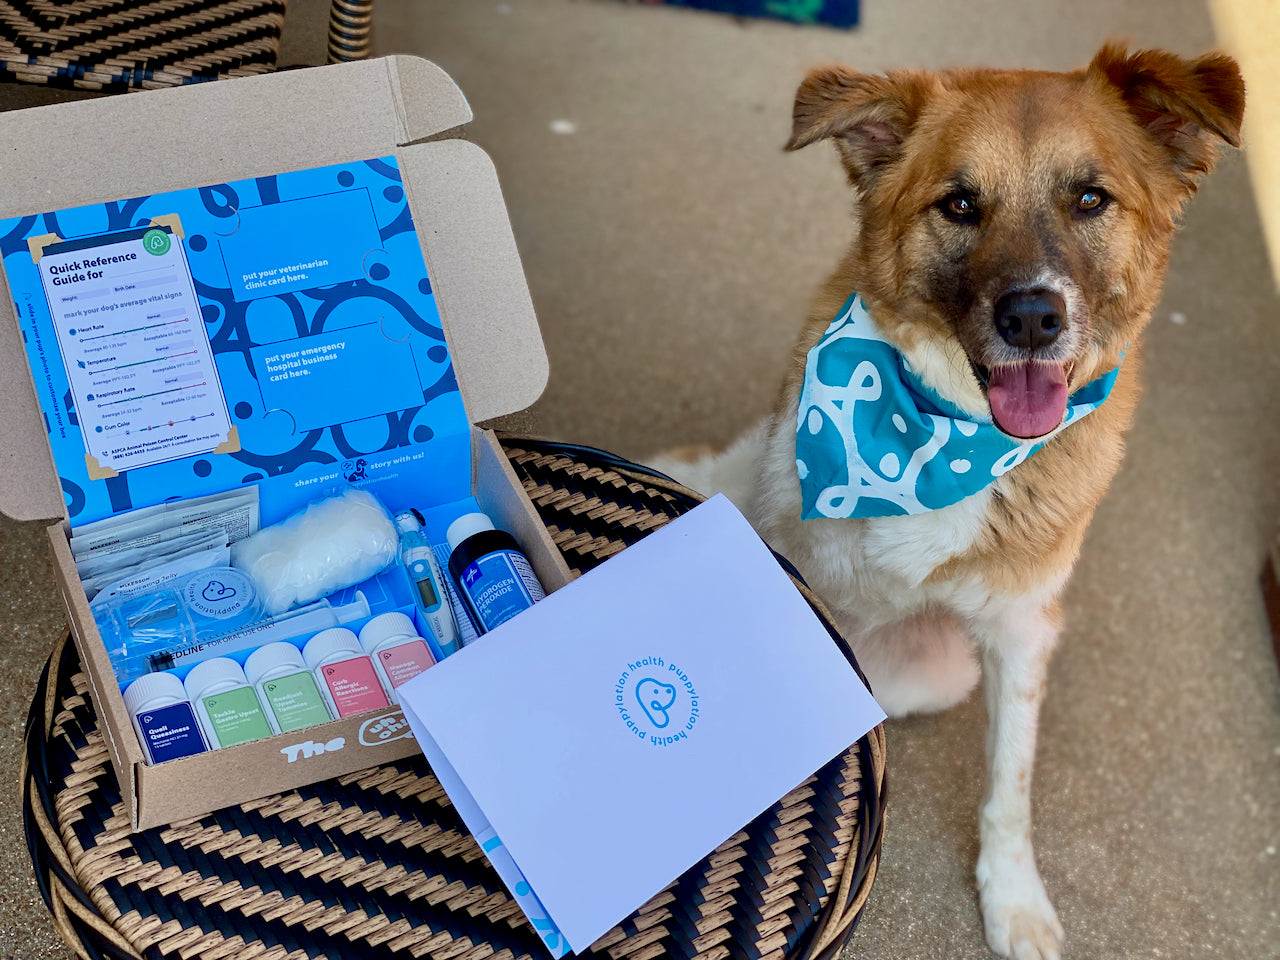 This adorable dog was the first Uh-Oh Kit customer. The Uh-Oh Kit is a customizable medicine cabinet for dogs. It includes meclizine, famotidine, probiotic, diphenhydramine, loratadine, a digital thermometer, oral syringe, pill splitter and instructions.